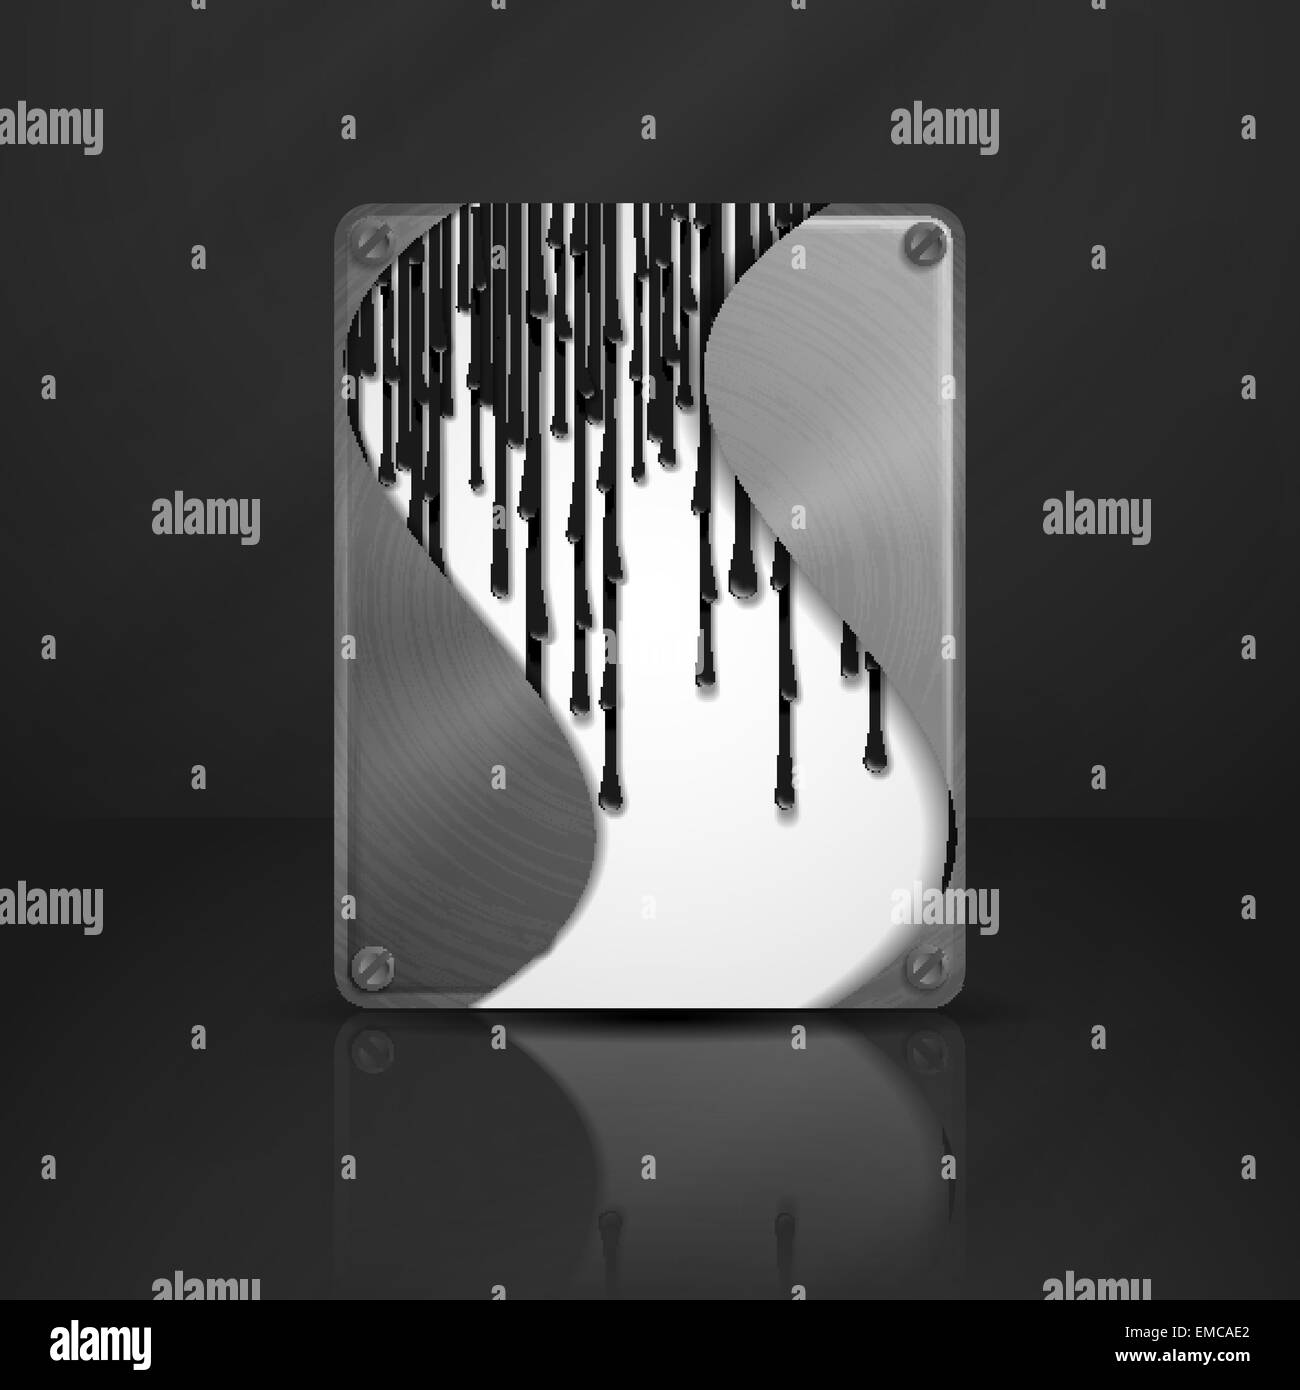 Metal Texture Plate With Screws. Stock Vector